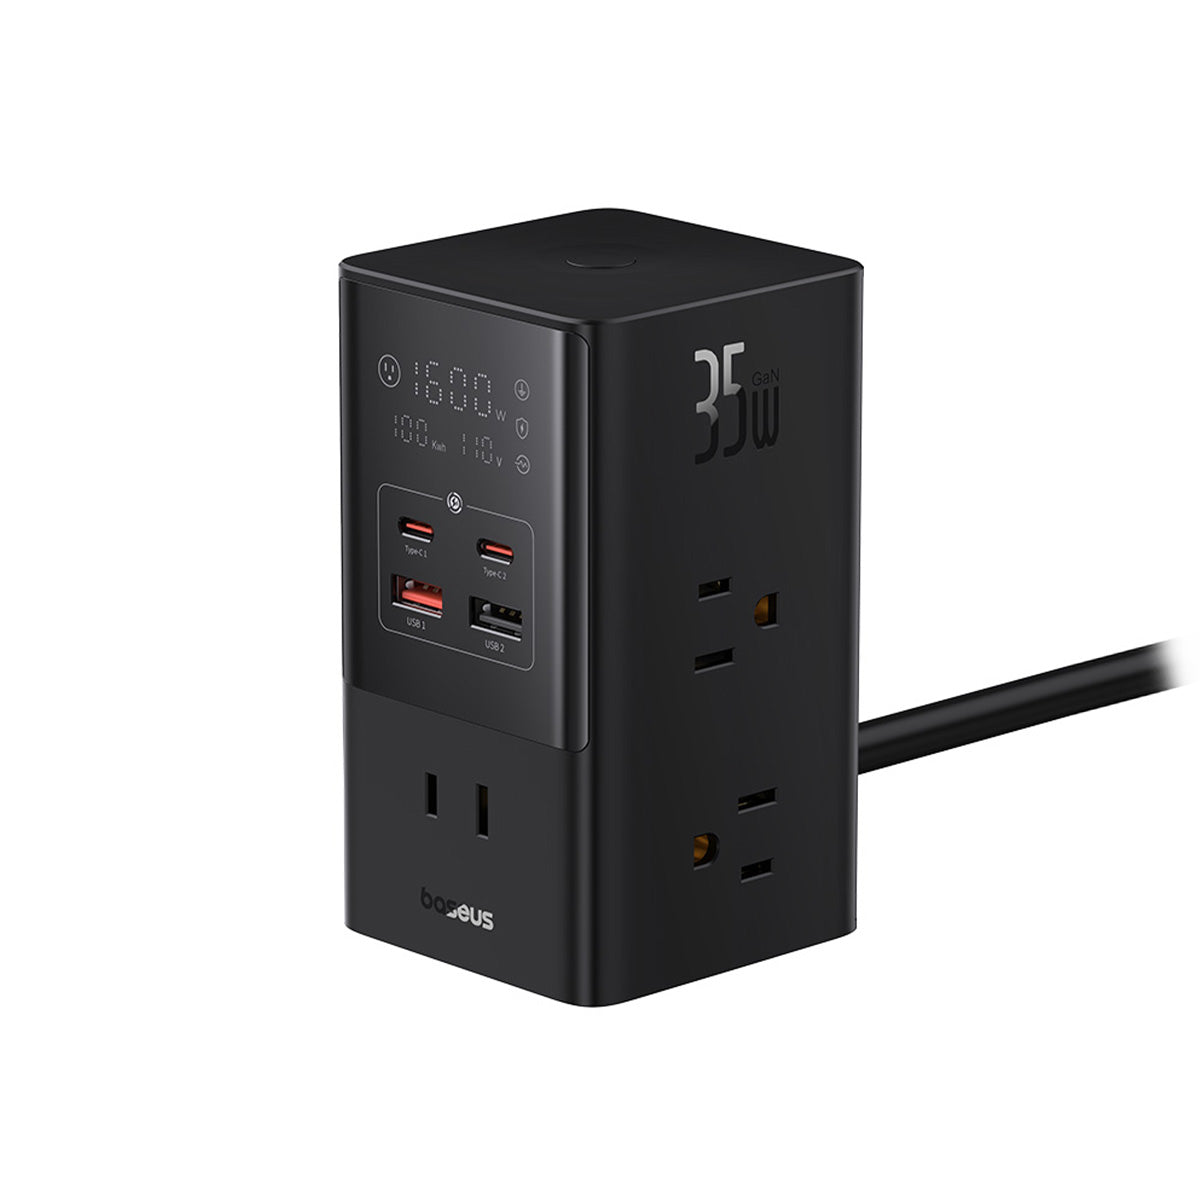  PowerCombo Tower Series Power Strip 35 W with a digital LED display